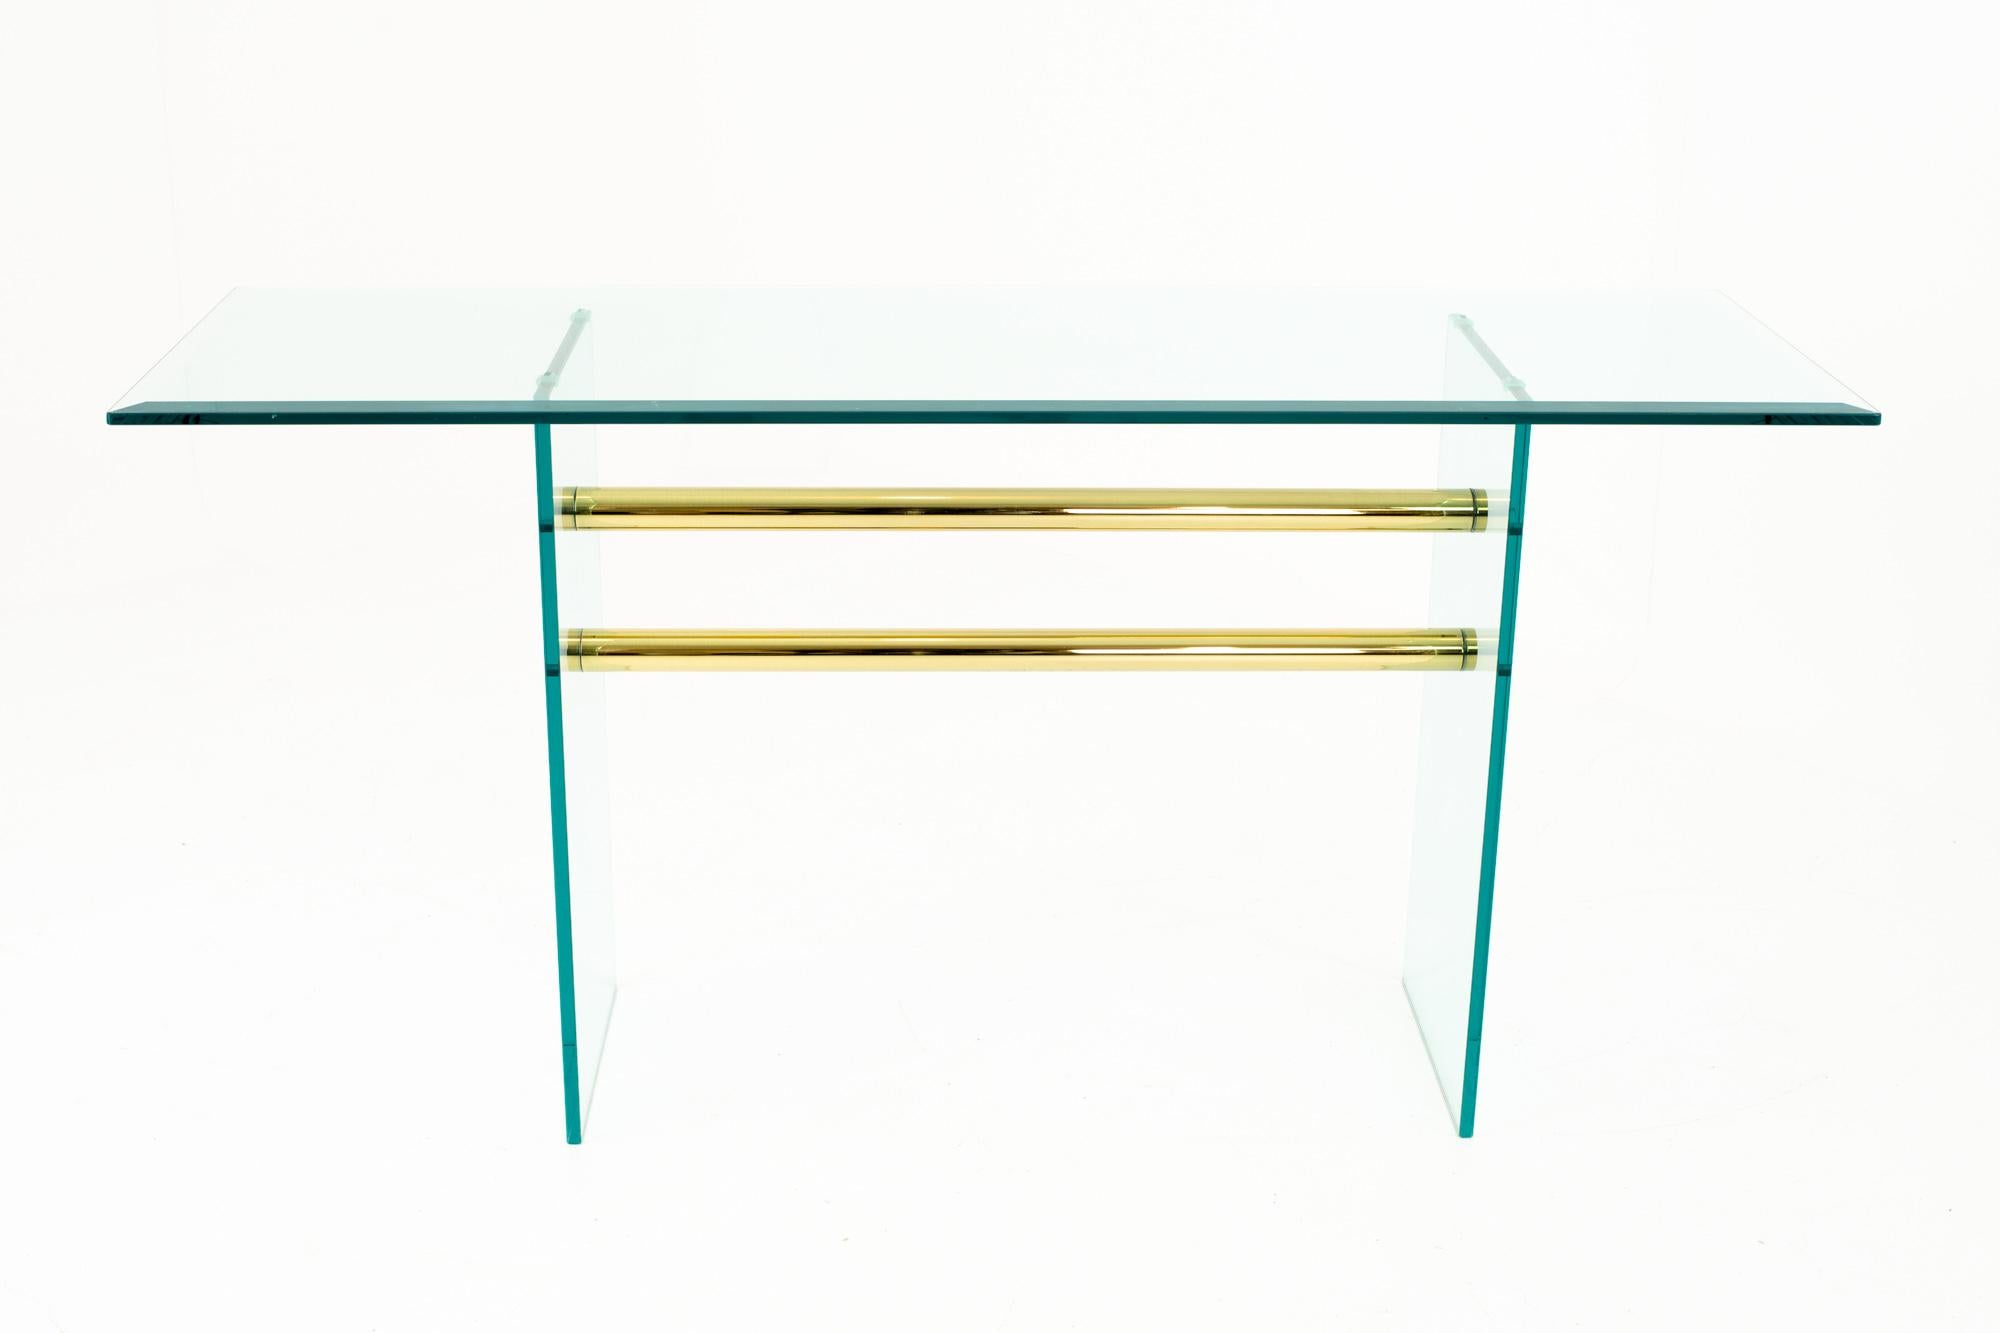 Pace Mid Century brass and glass coffee sofa table
Measures: 54 wide x 18 deep x 26.5 high
See below for 5 ways to save!
Free restoration: When you purchase a piece we carefully clean and prepare it for shipping. If during re-inspection we discover